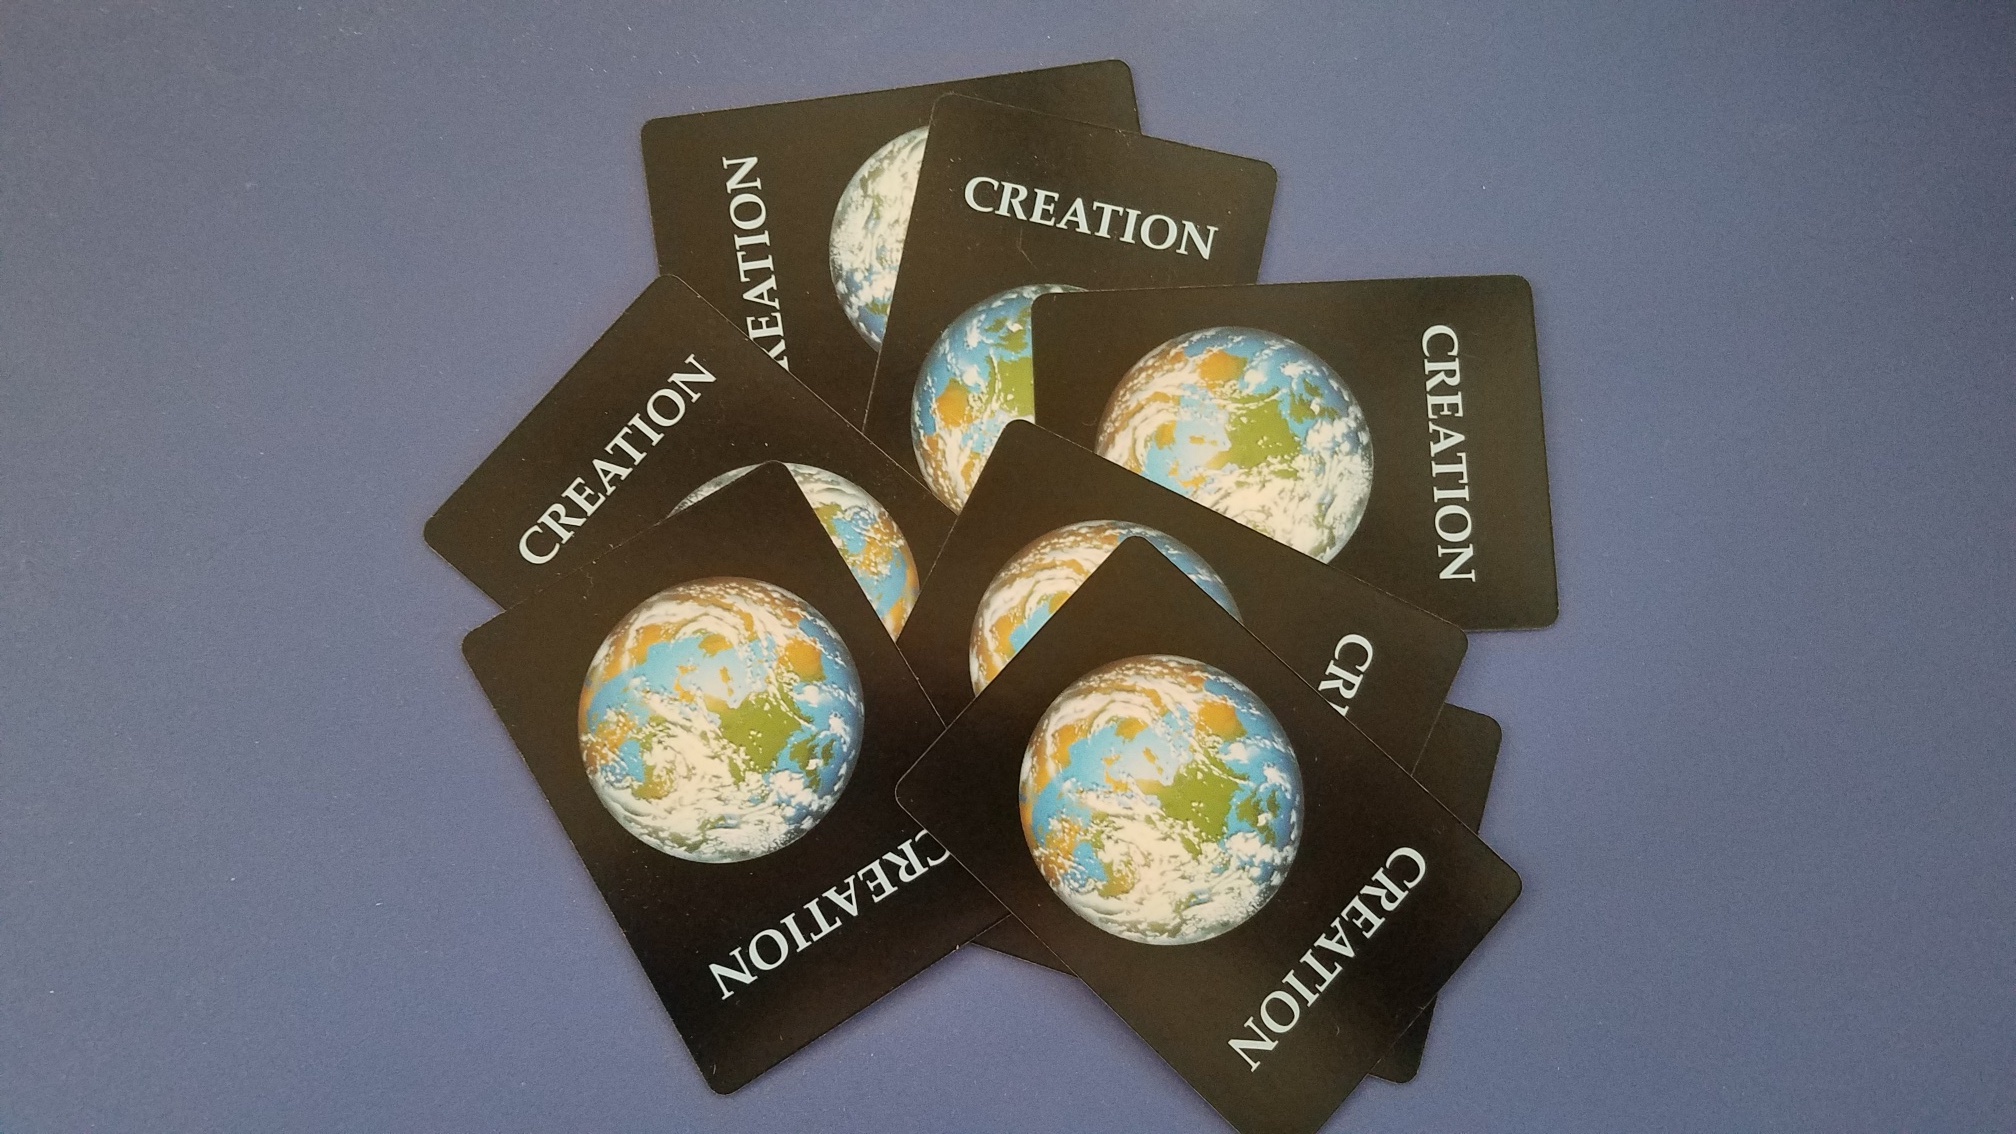 Image of card covers for Creation Card Game